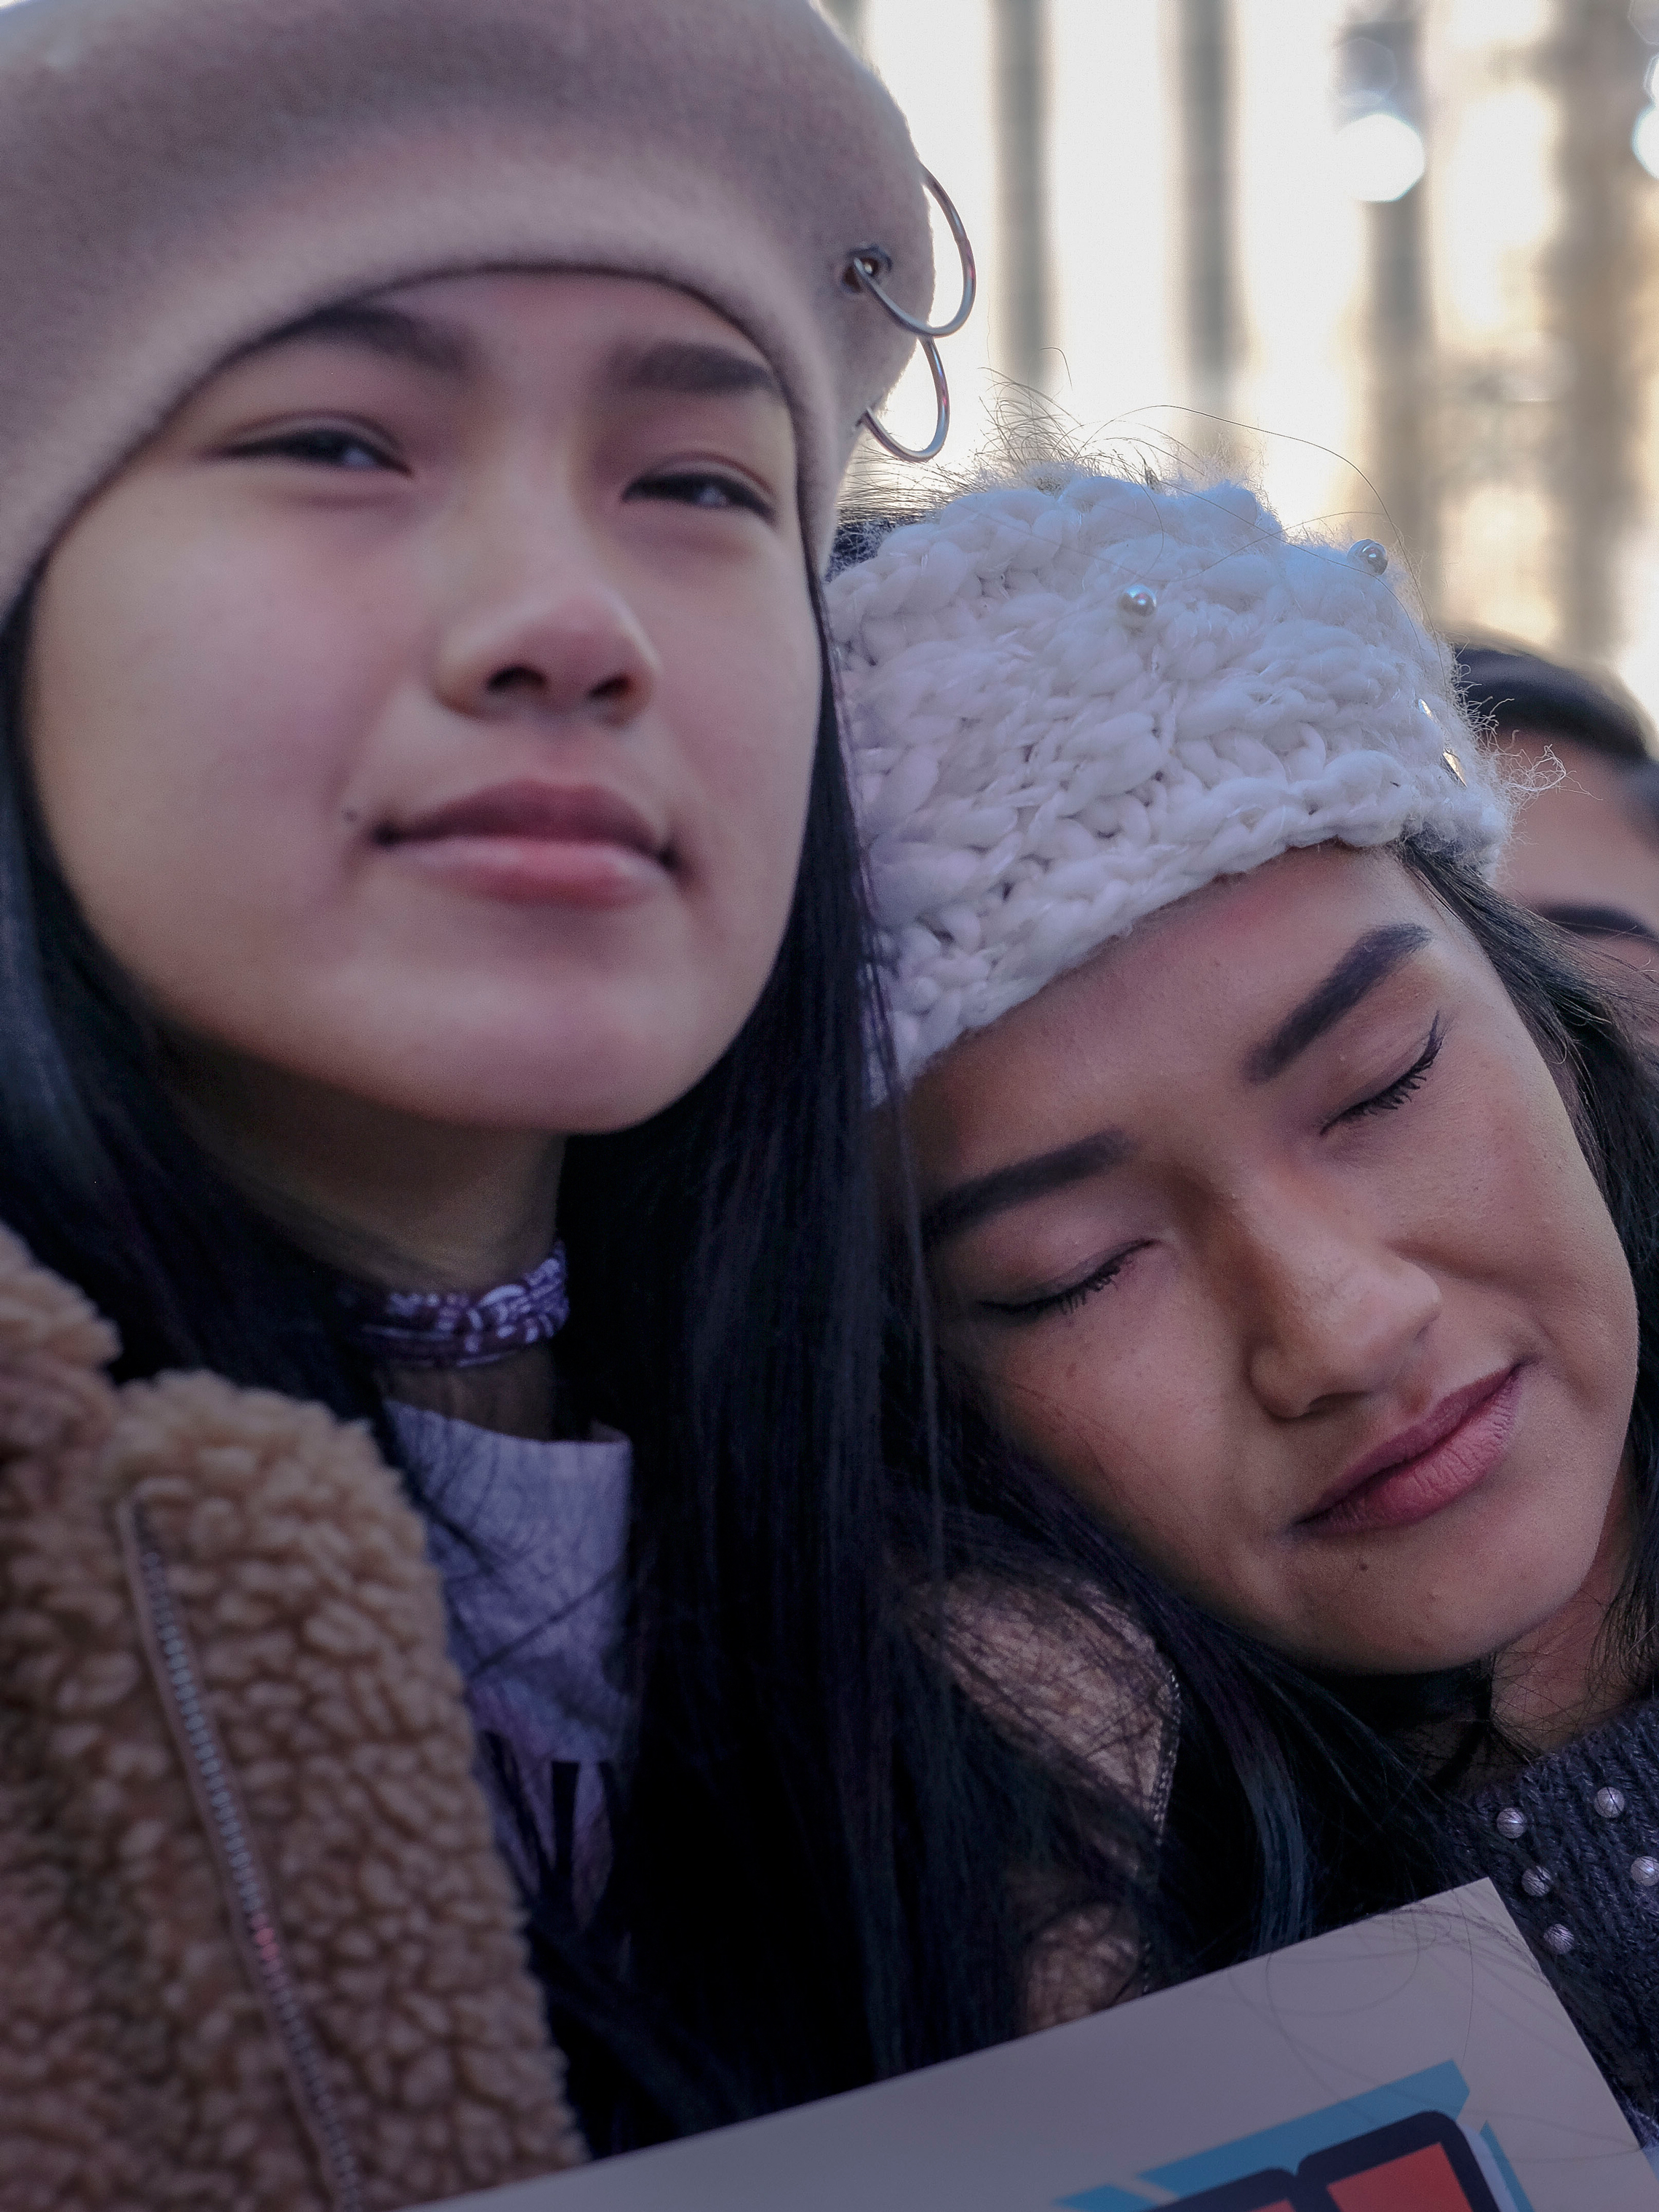 Sisters Chloe Trieu, 15, left, and Victoria Trieu, 19, both attended Marjory Stoneman Douglas High School. (Gabriella Demczuk for TIME)